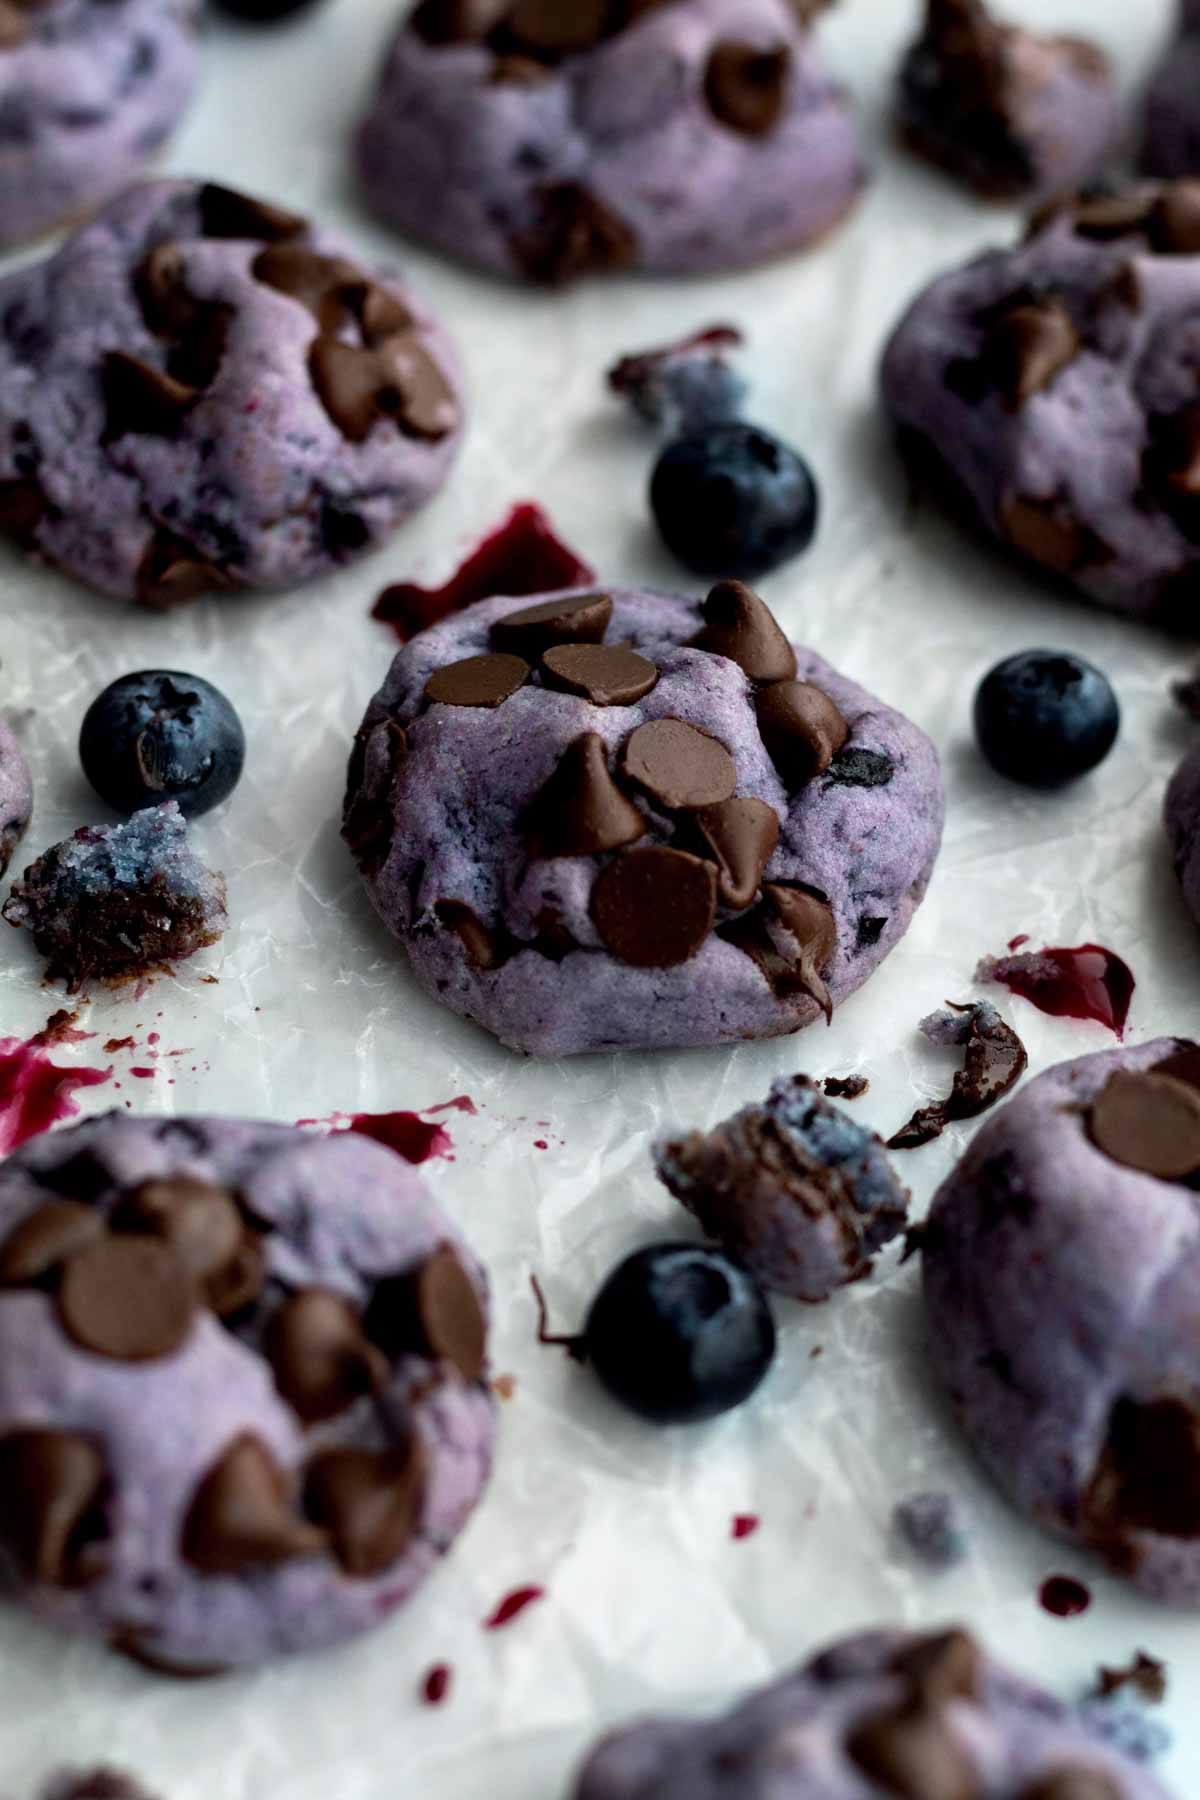 Gluten free Blueberry Chocollate Chip Cookies with chocolate chips on parchment paper.